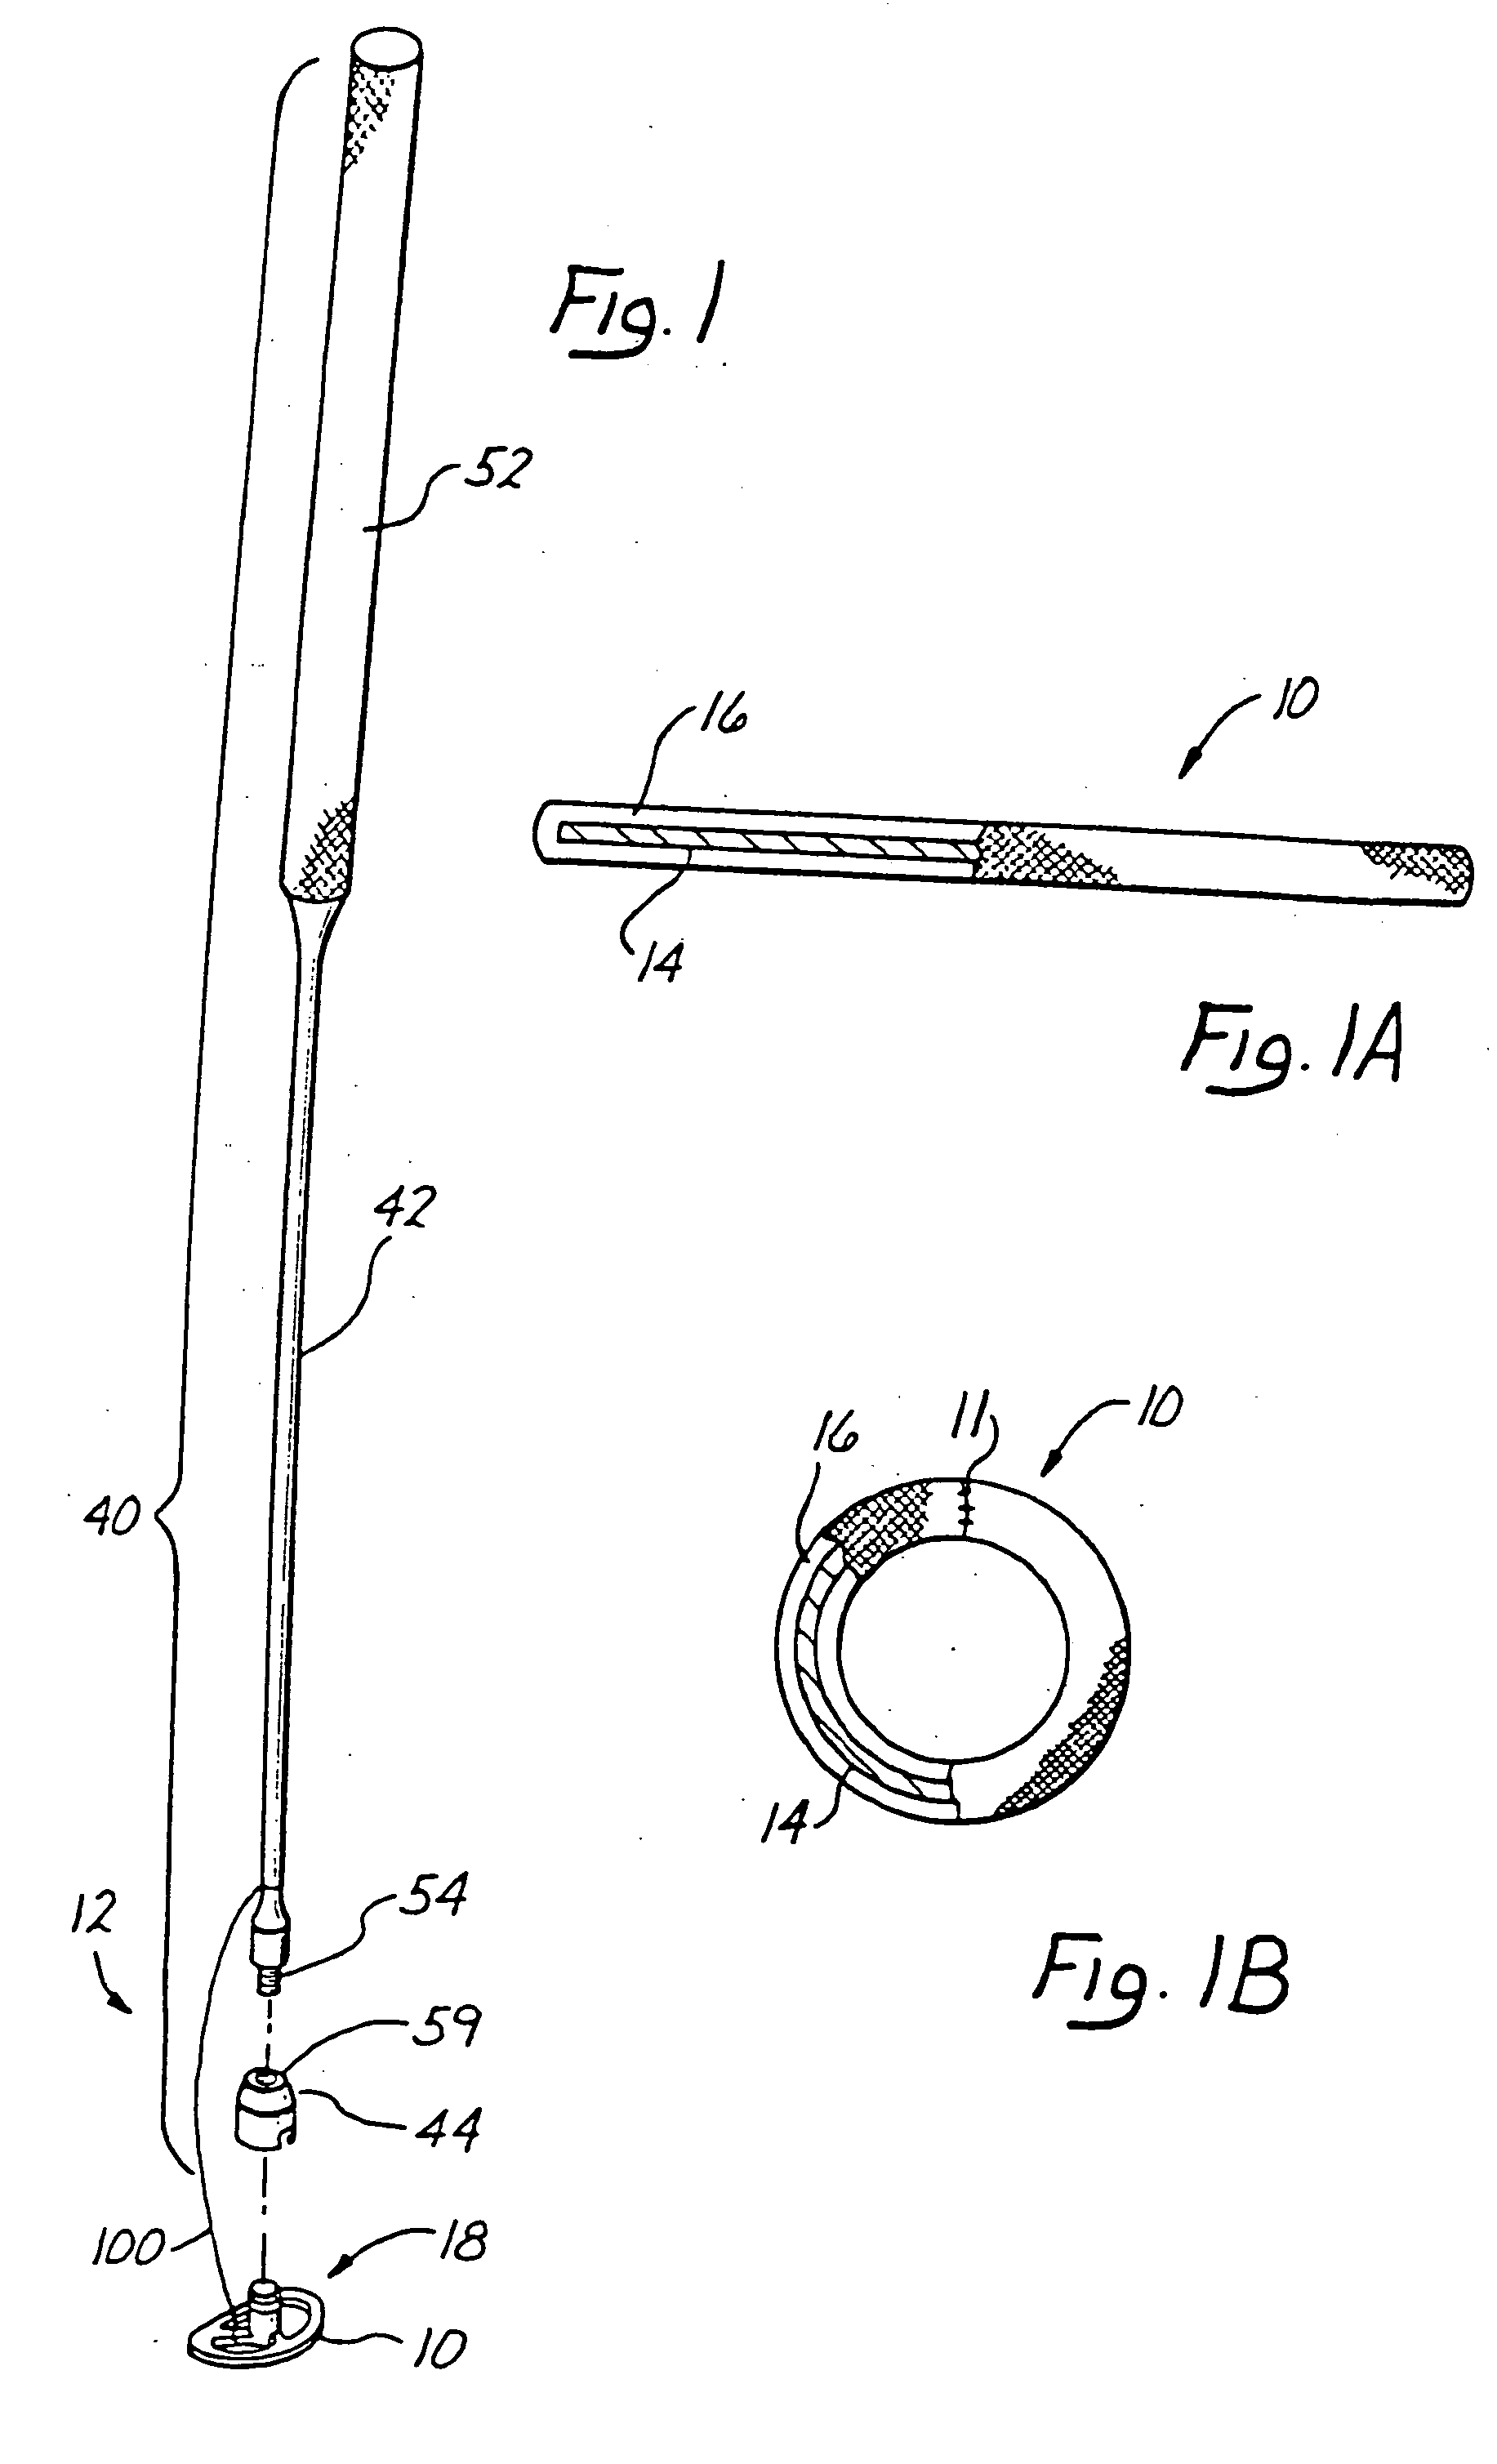 Annuloplasty ring delivery system and method